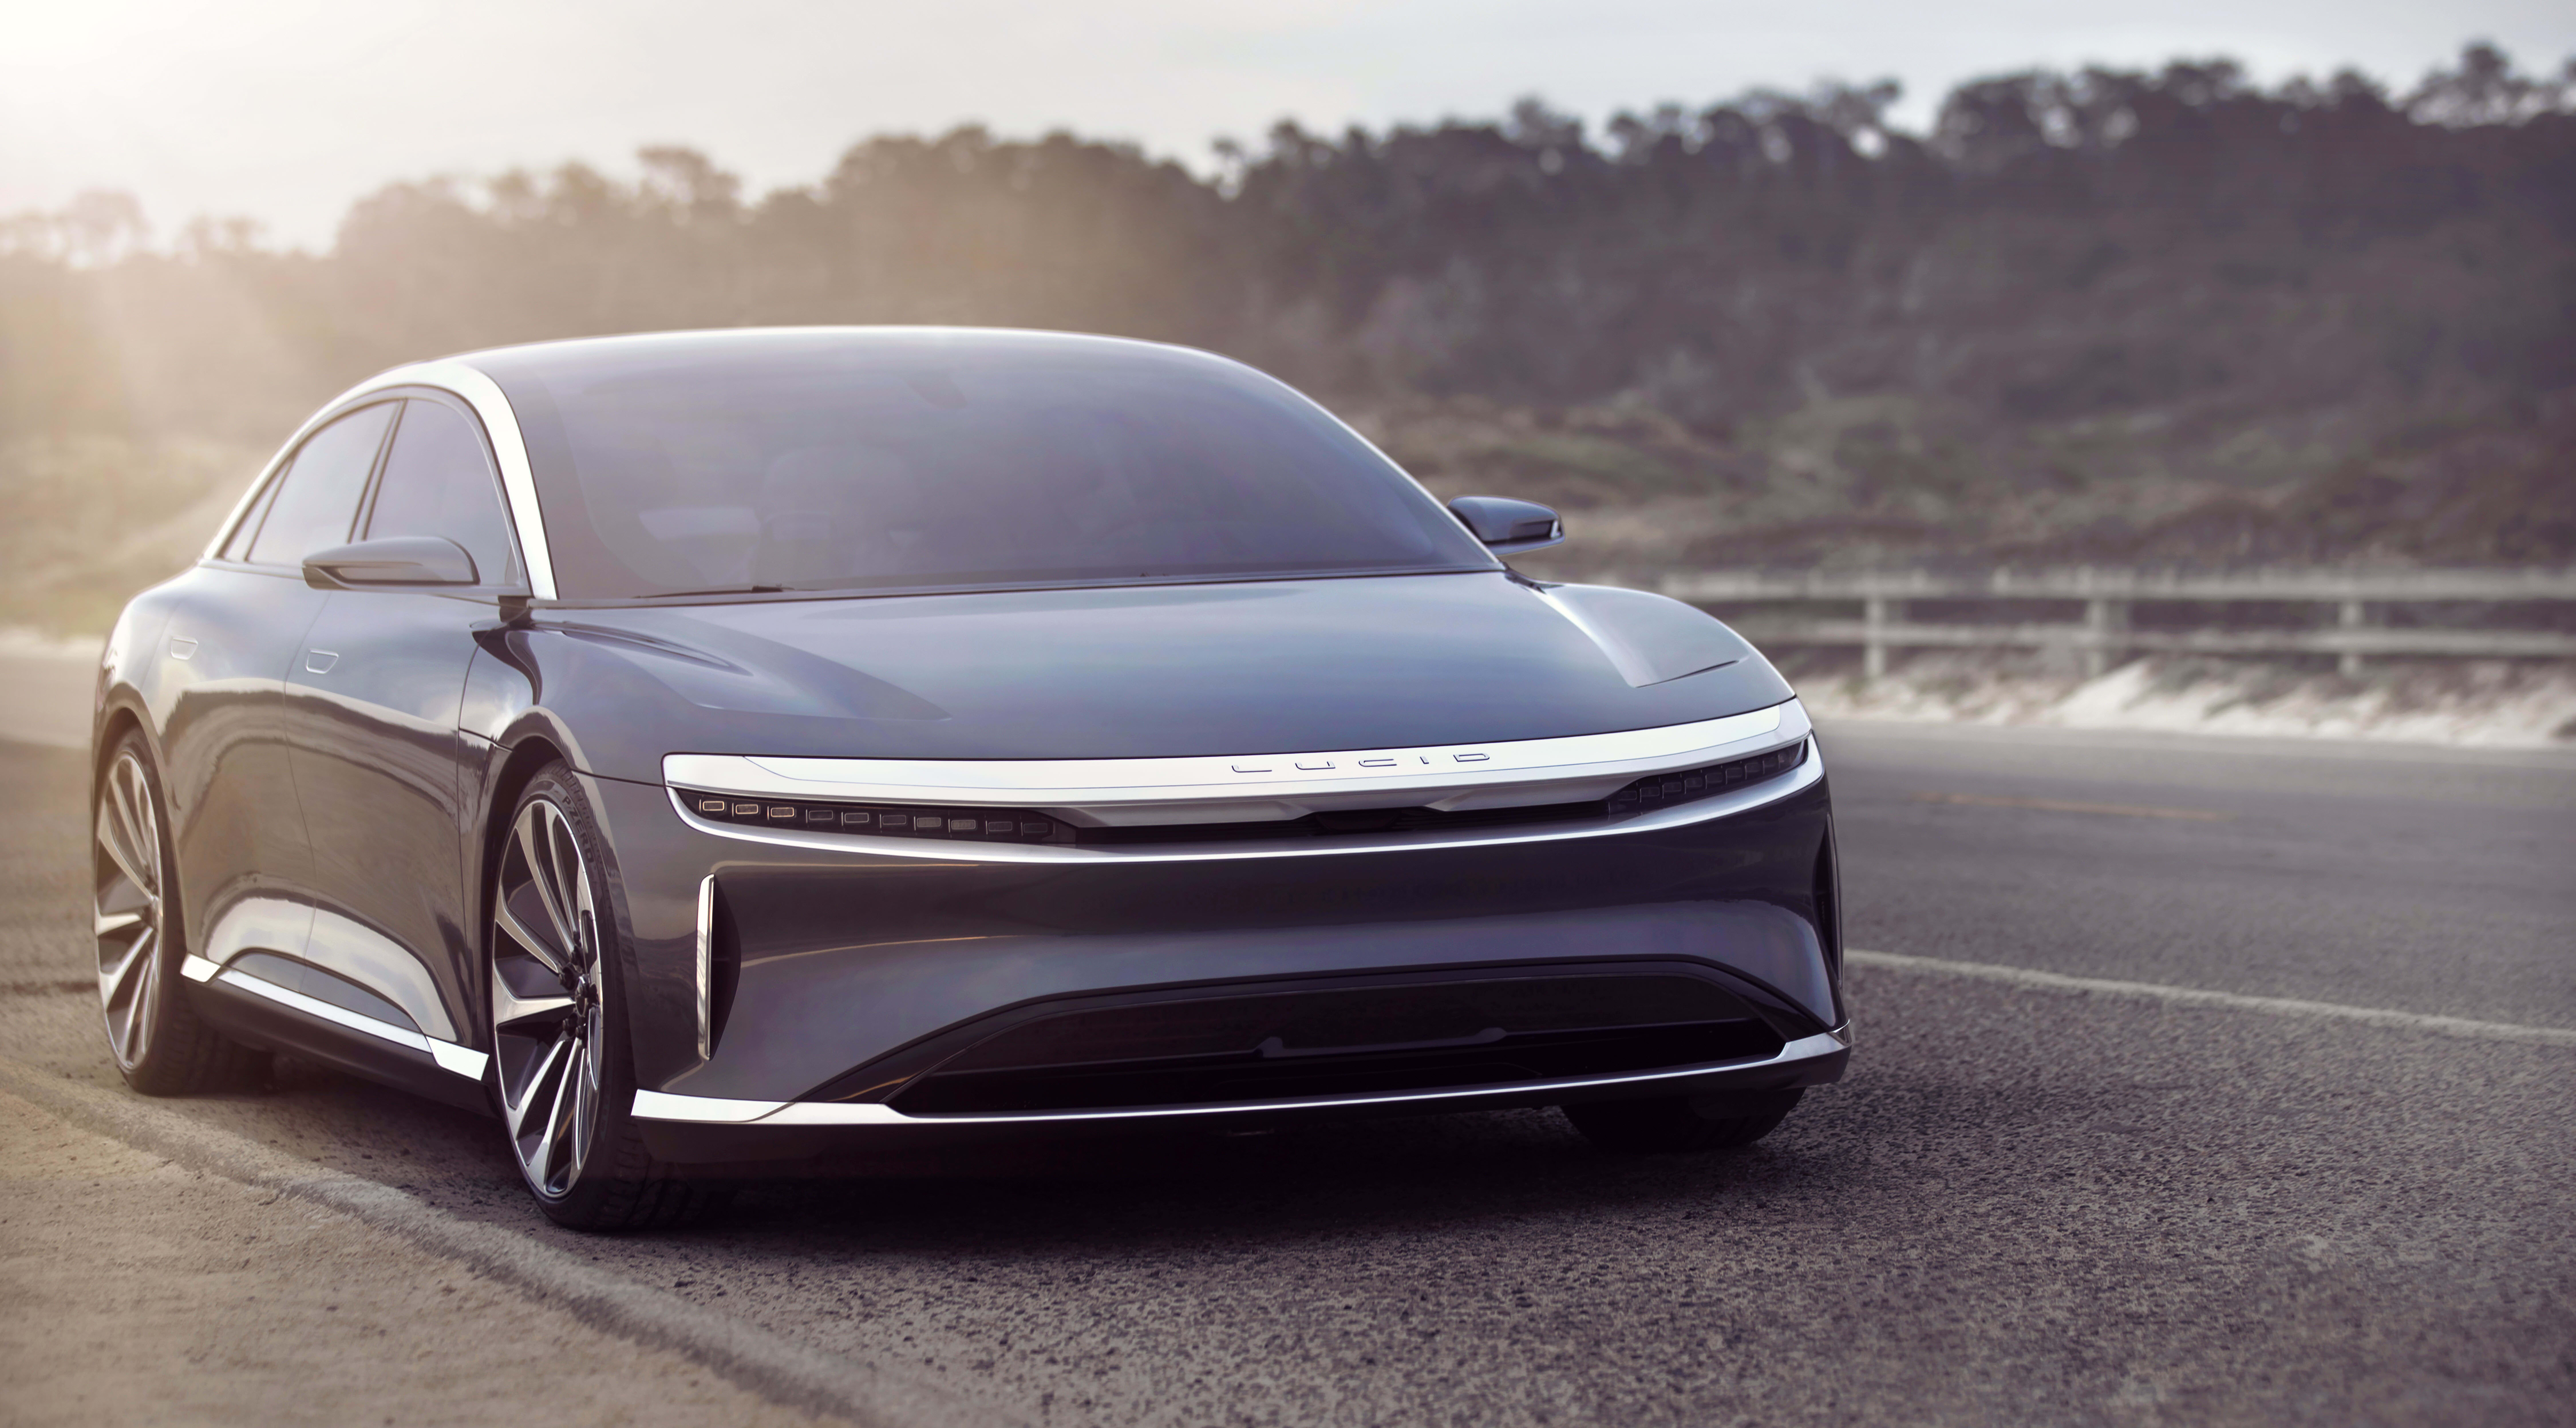 Lucid Air is getting its public debut in New York in April - CNET